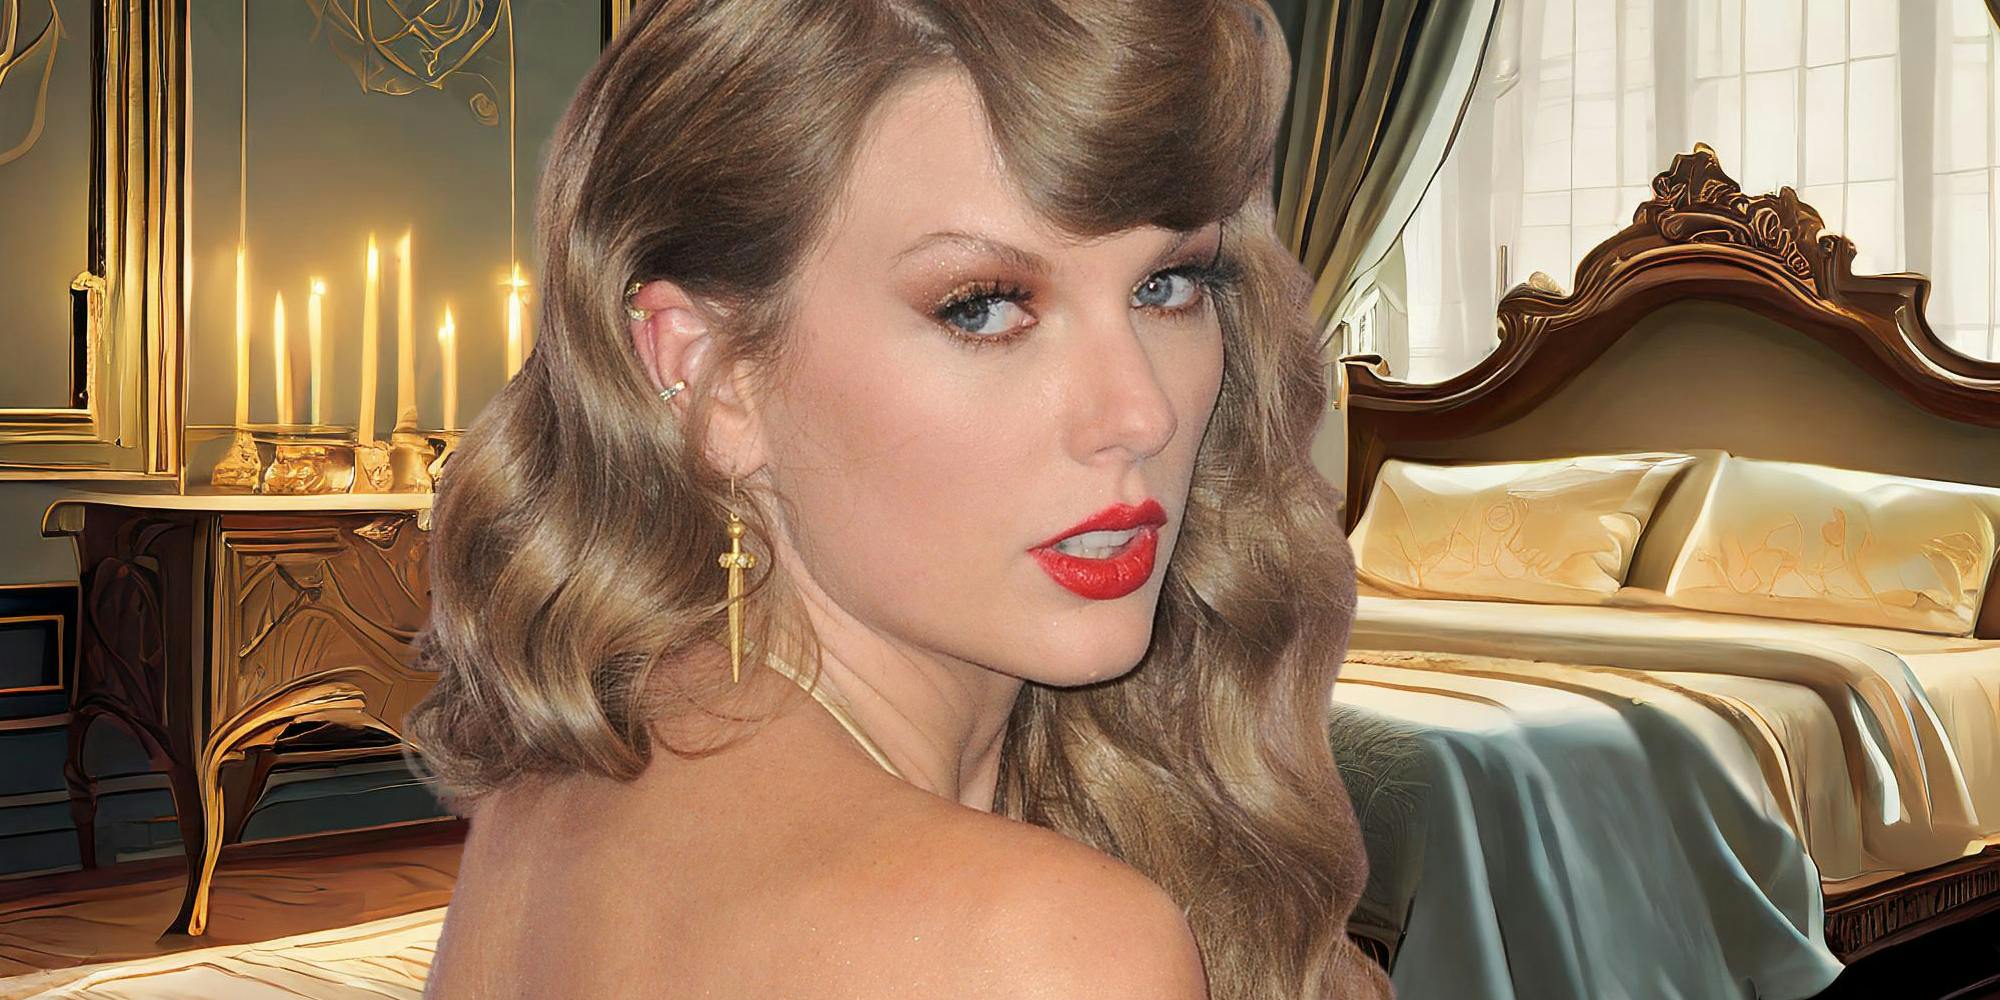 Explicit AI images Of Taylor Swift Get Millions Of Views On X